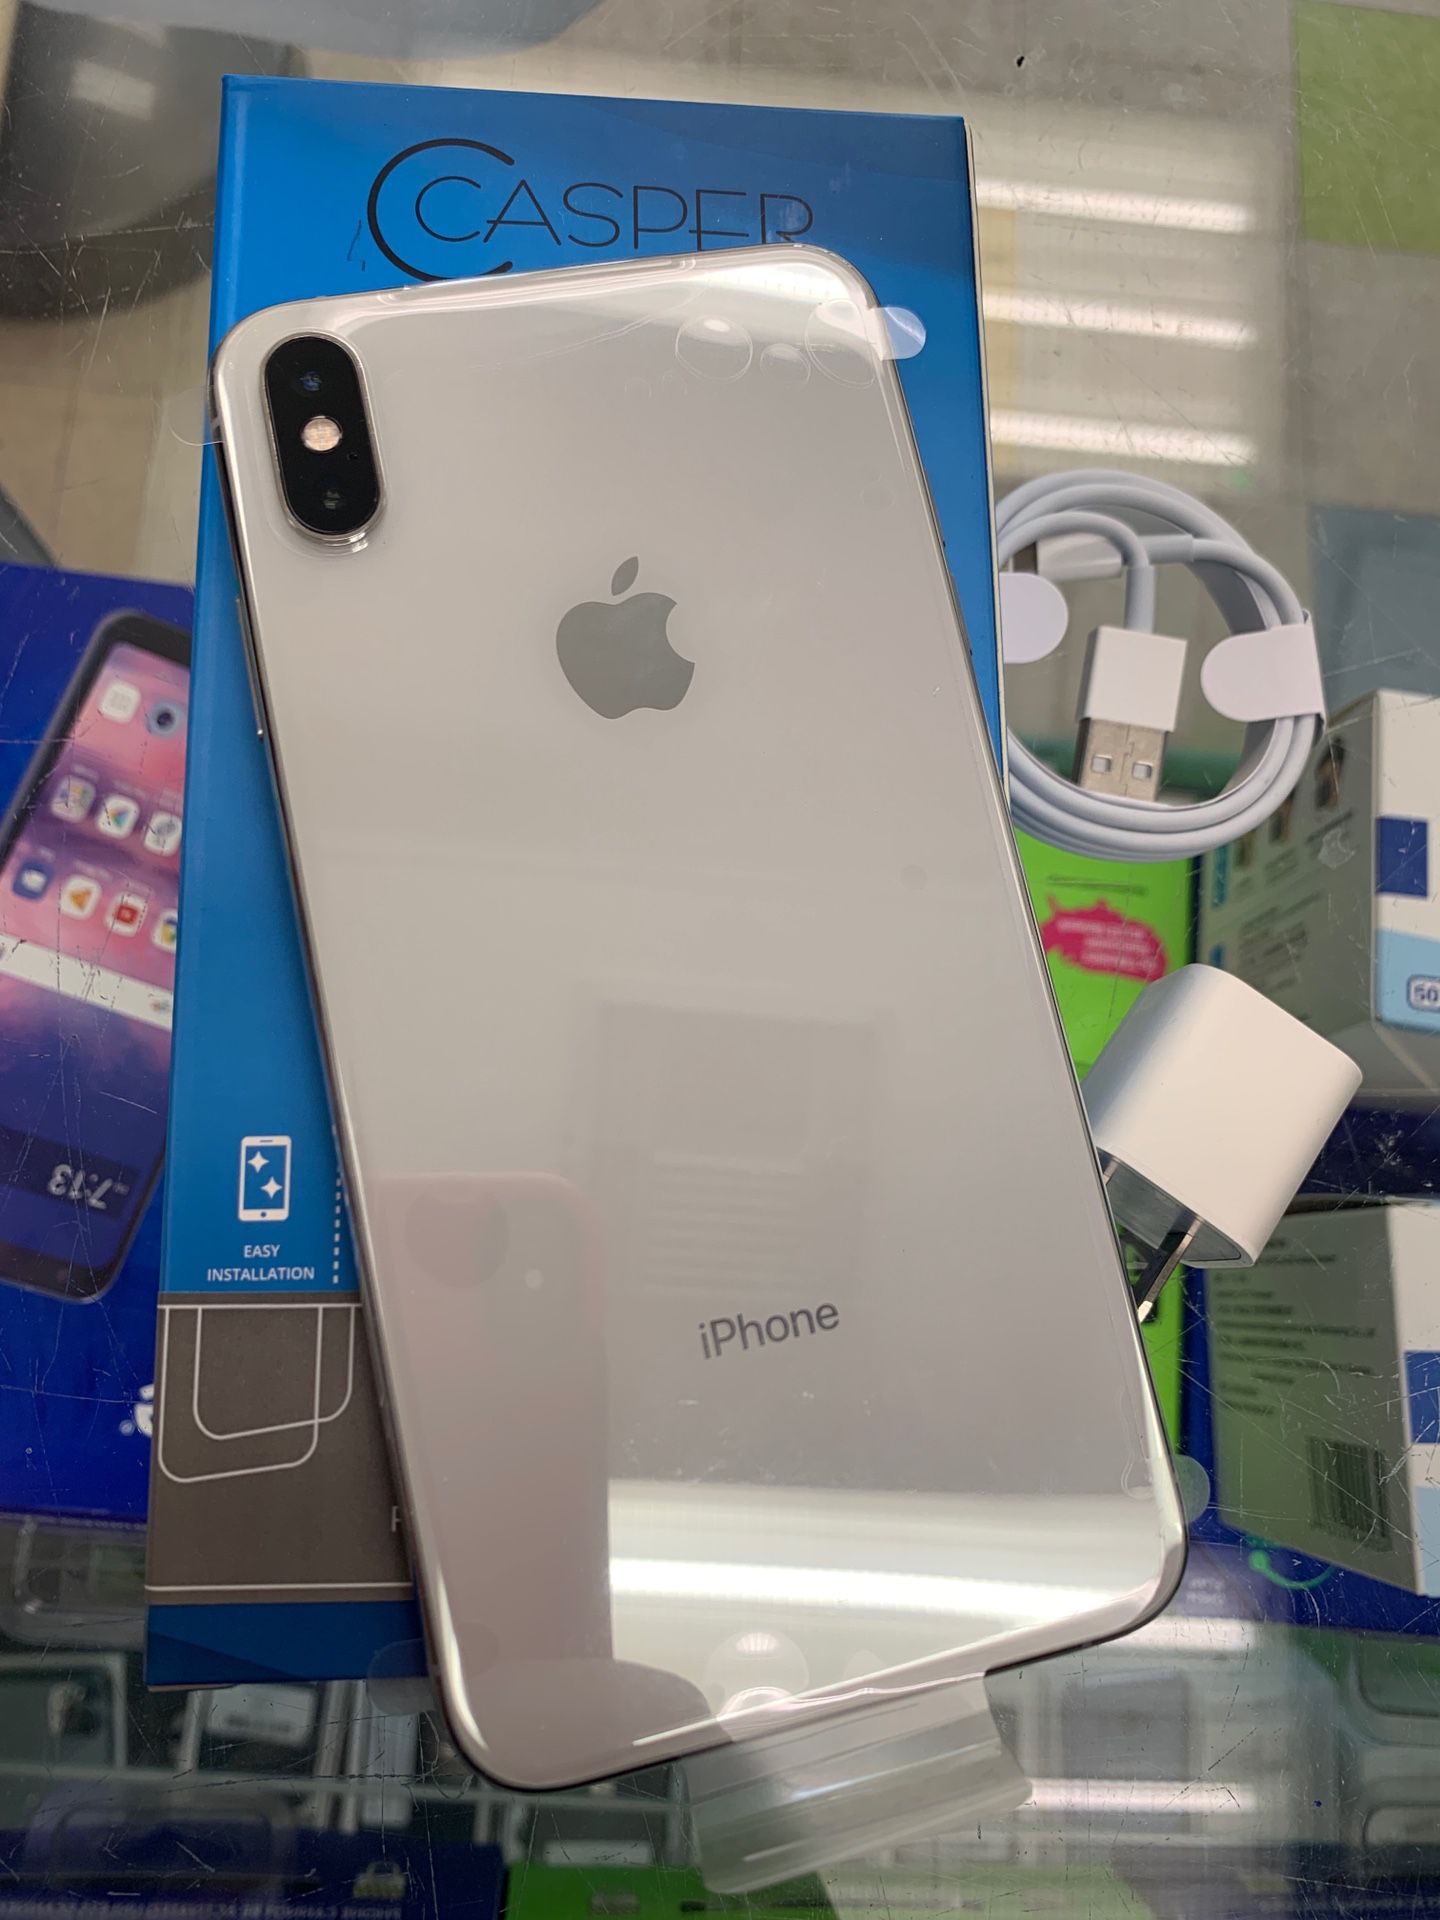 Factory unlocked iPhone XS Max 64 gb sold with warranty